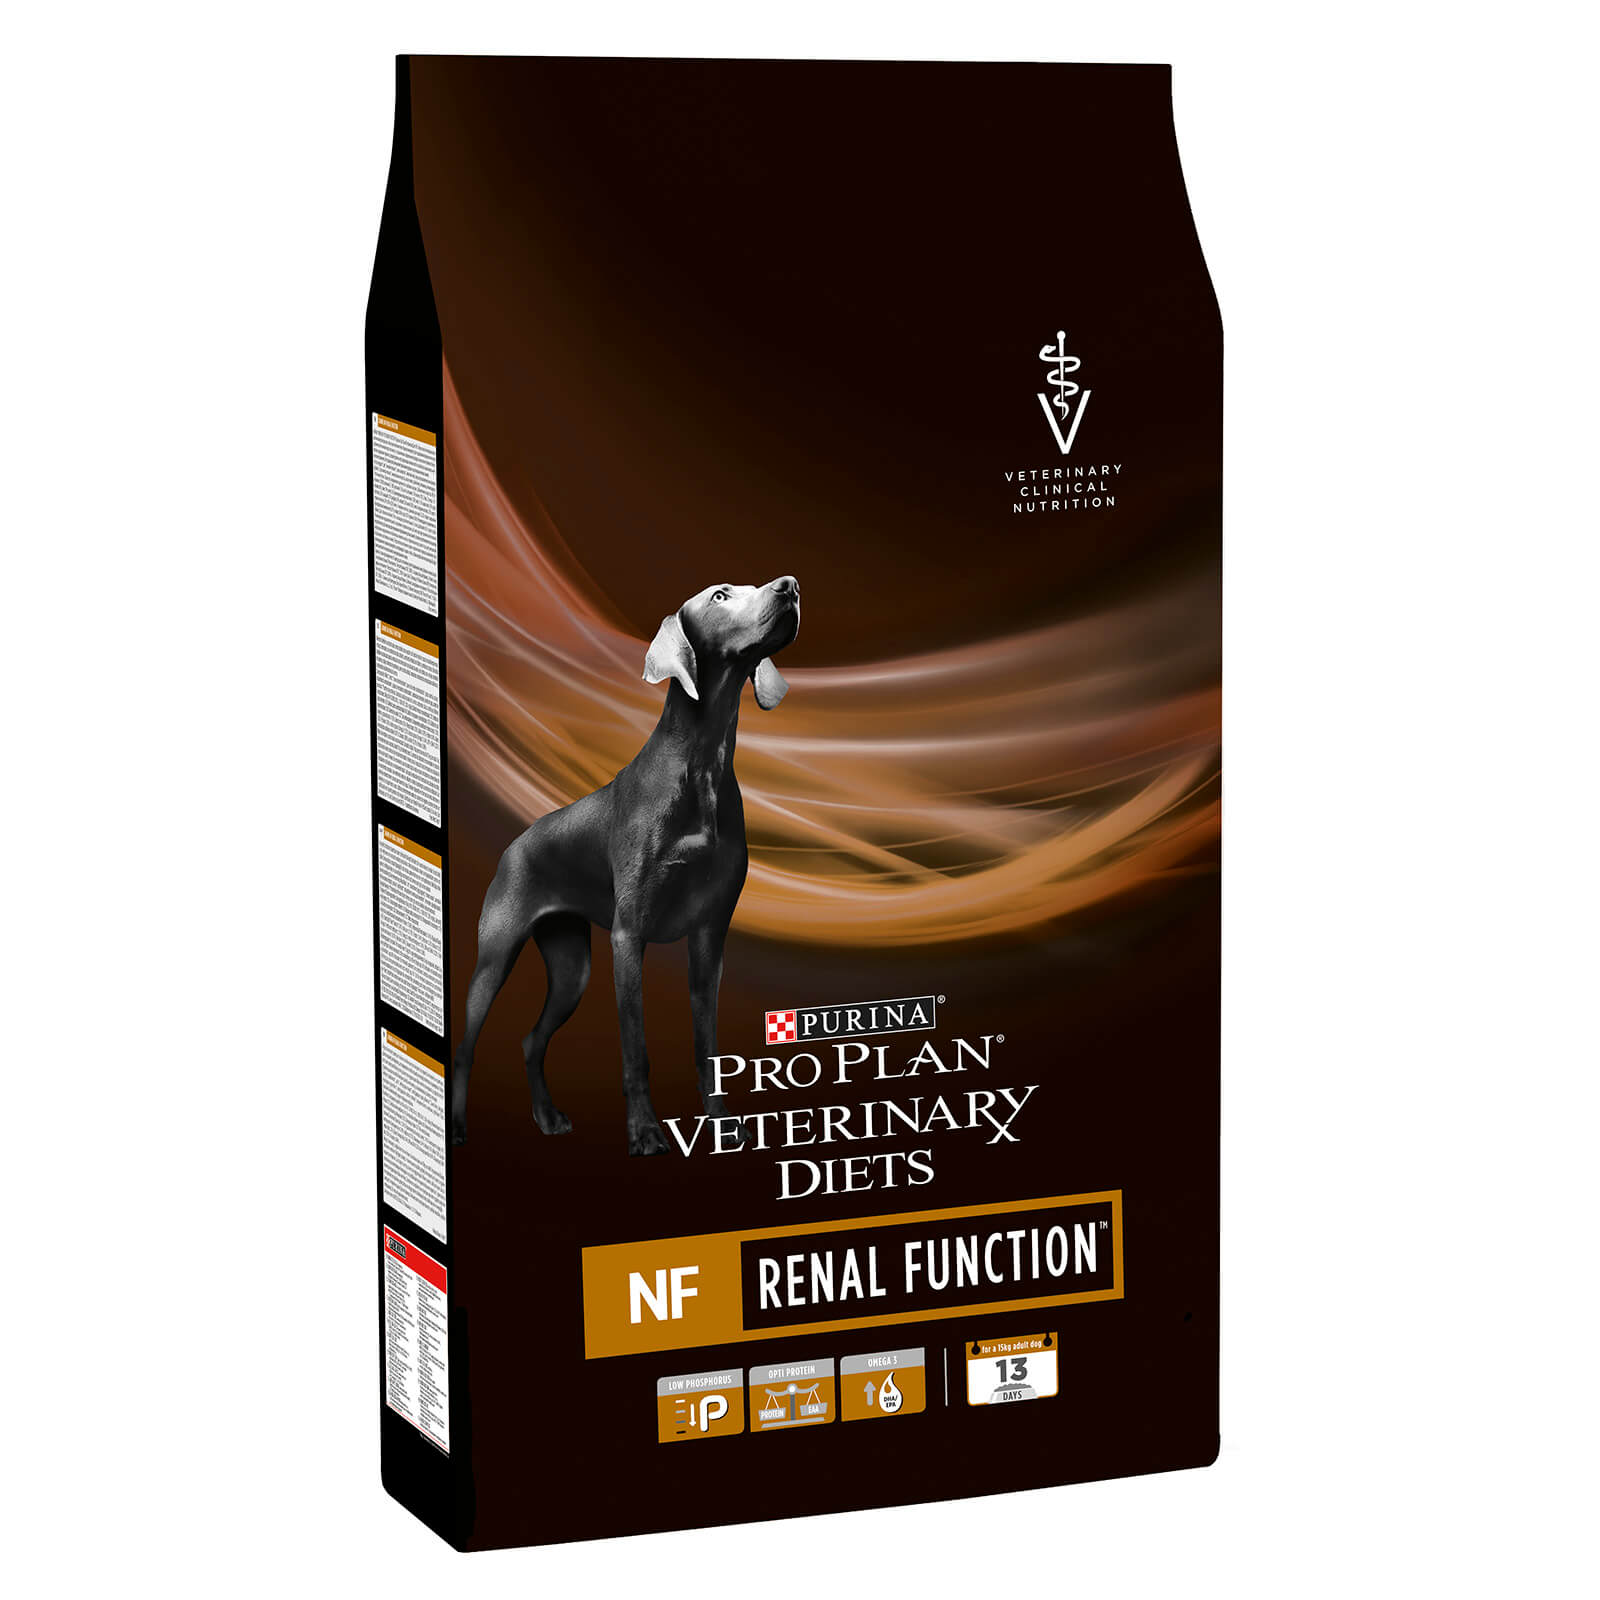 PRO PLAN VETERINARY DIETS NF Renal Function Hund 3 kg